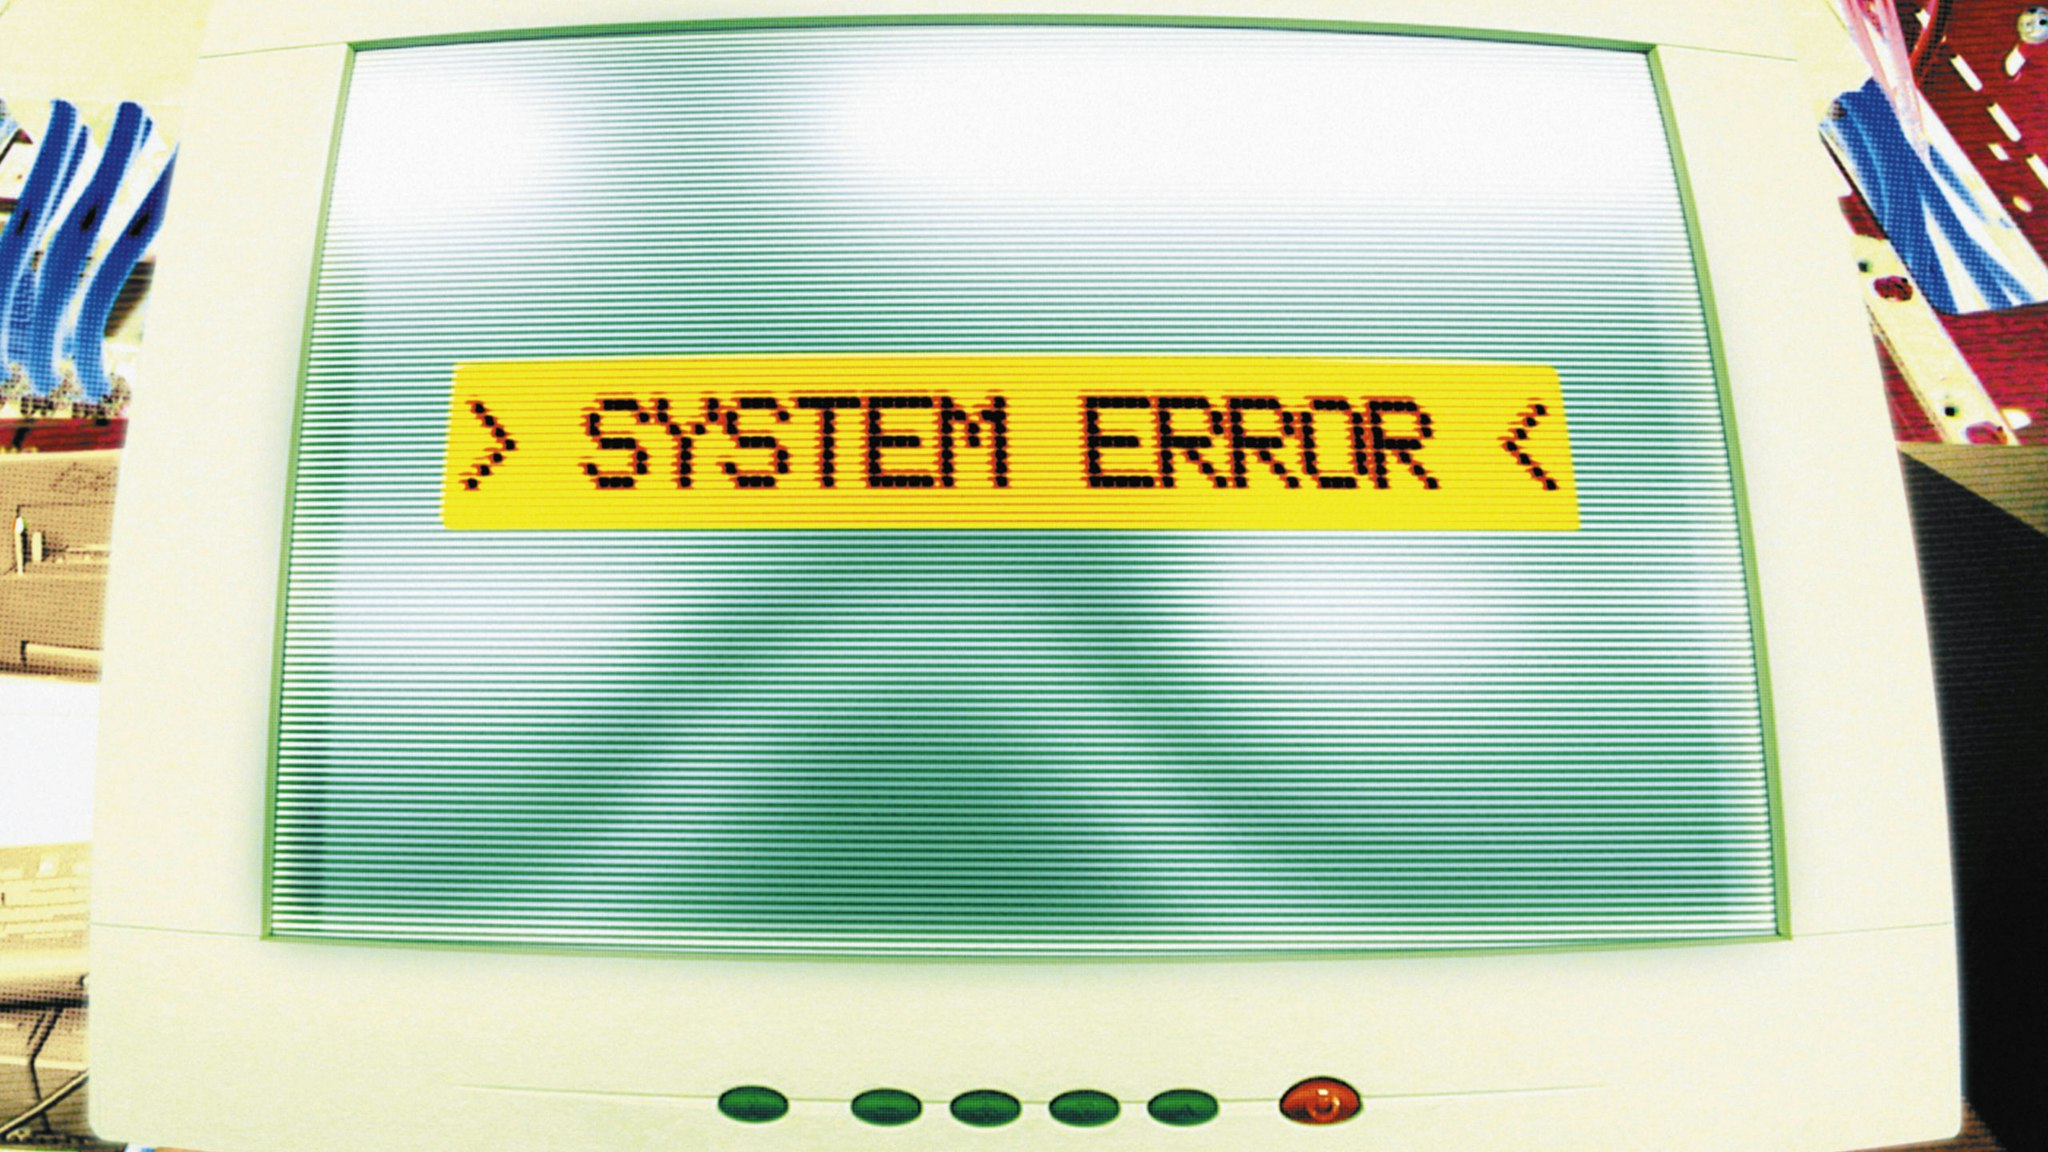 Computer systems error message on screen, digital composite.